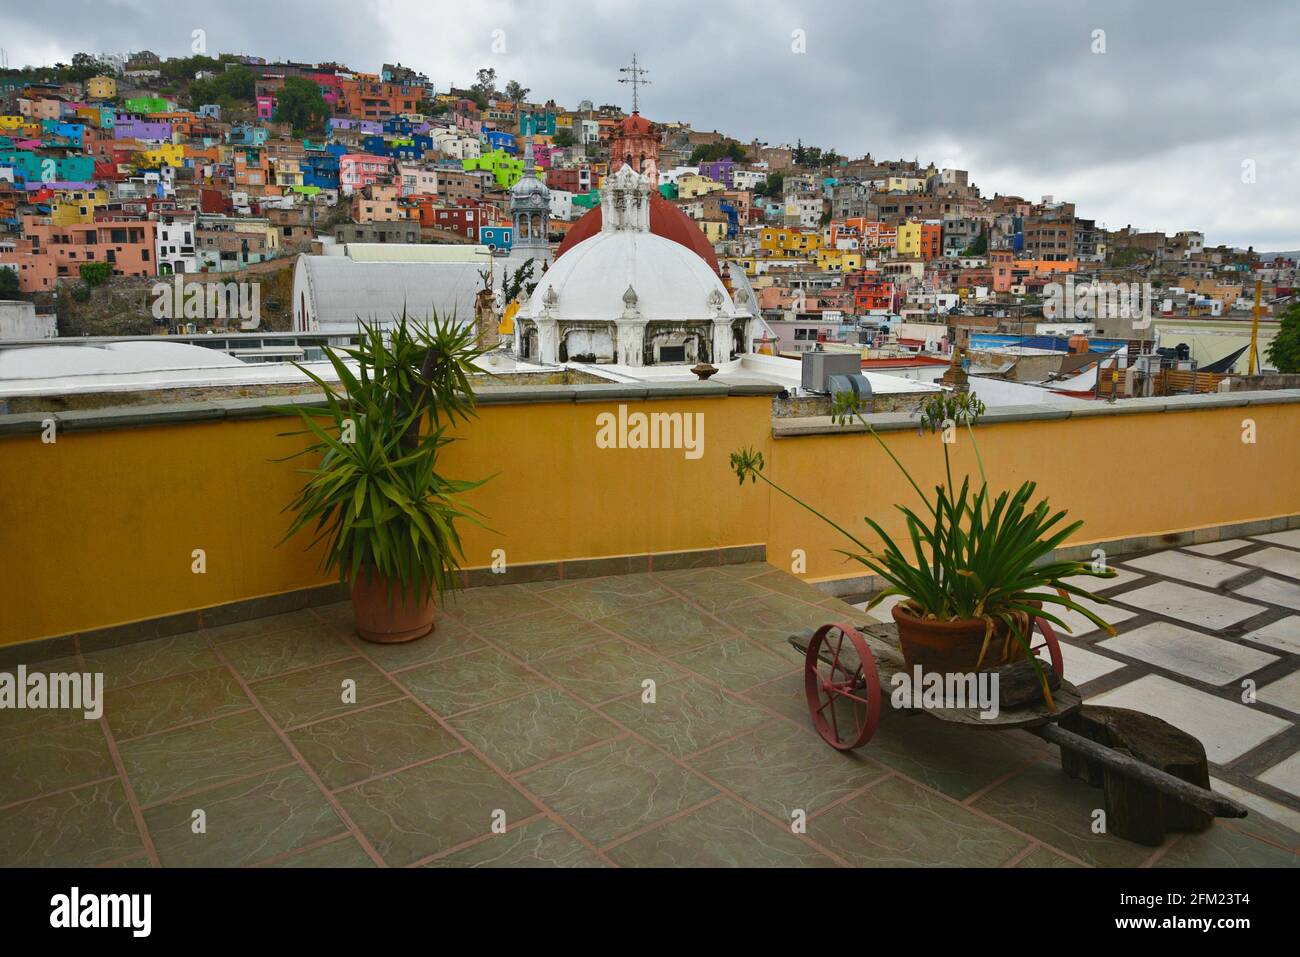 Panoramic view of Guanajuato with the colorful Spanish Colonial architecture and the Baroque style Templo de San Diego in Guanajuato, Mexico. Stock Photo